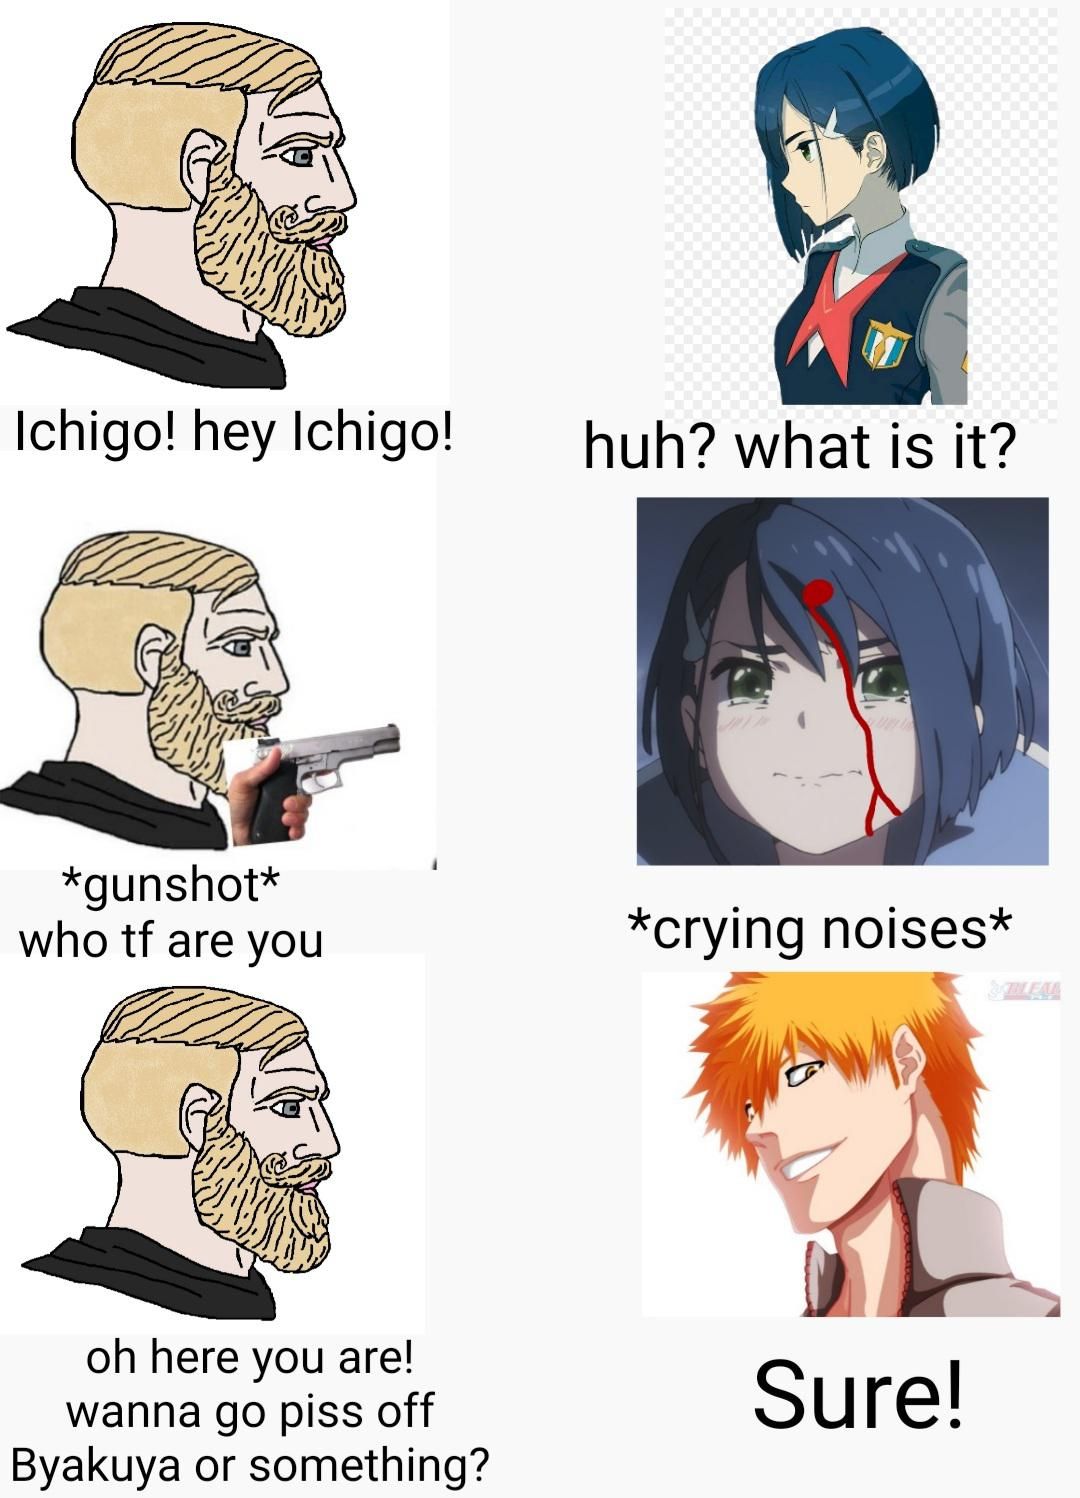 there can be only one Ichigo. and he has Orange hair!